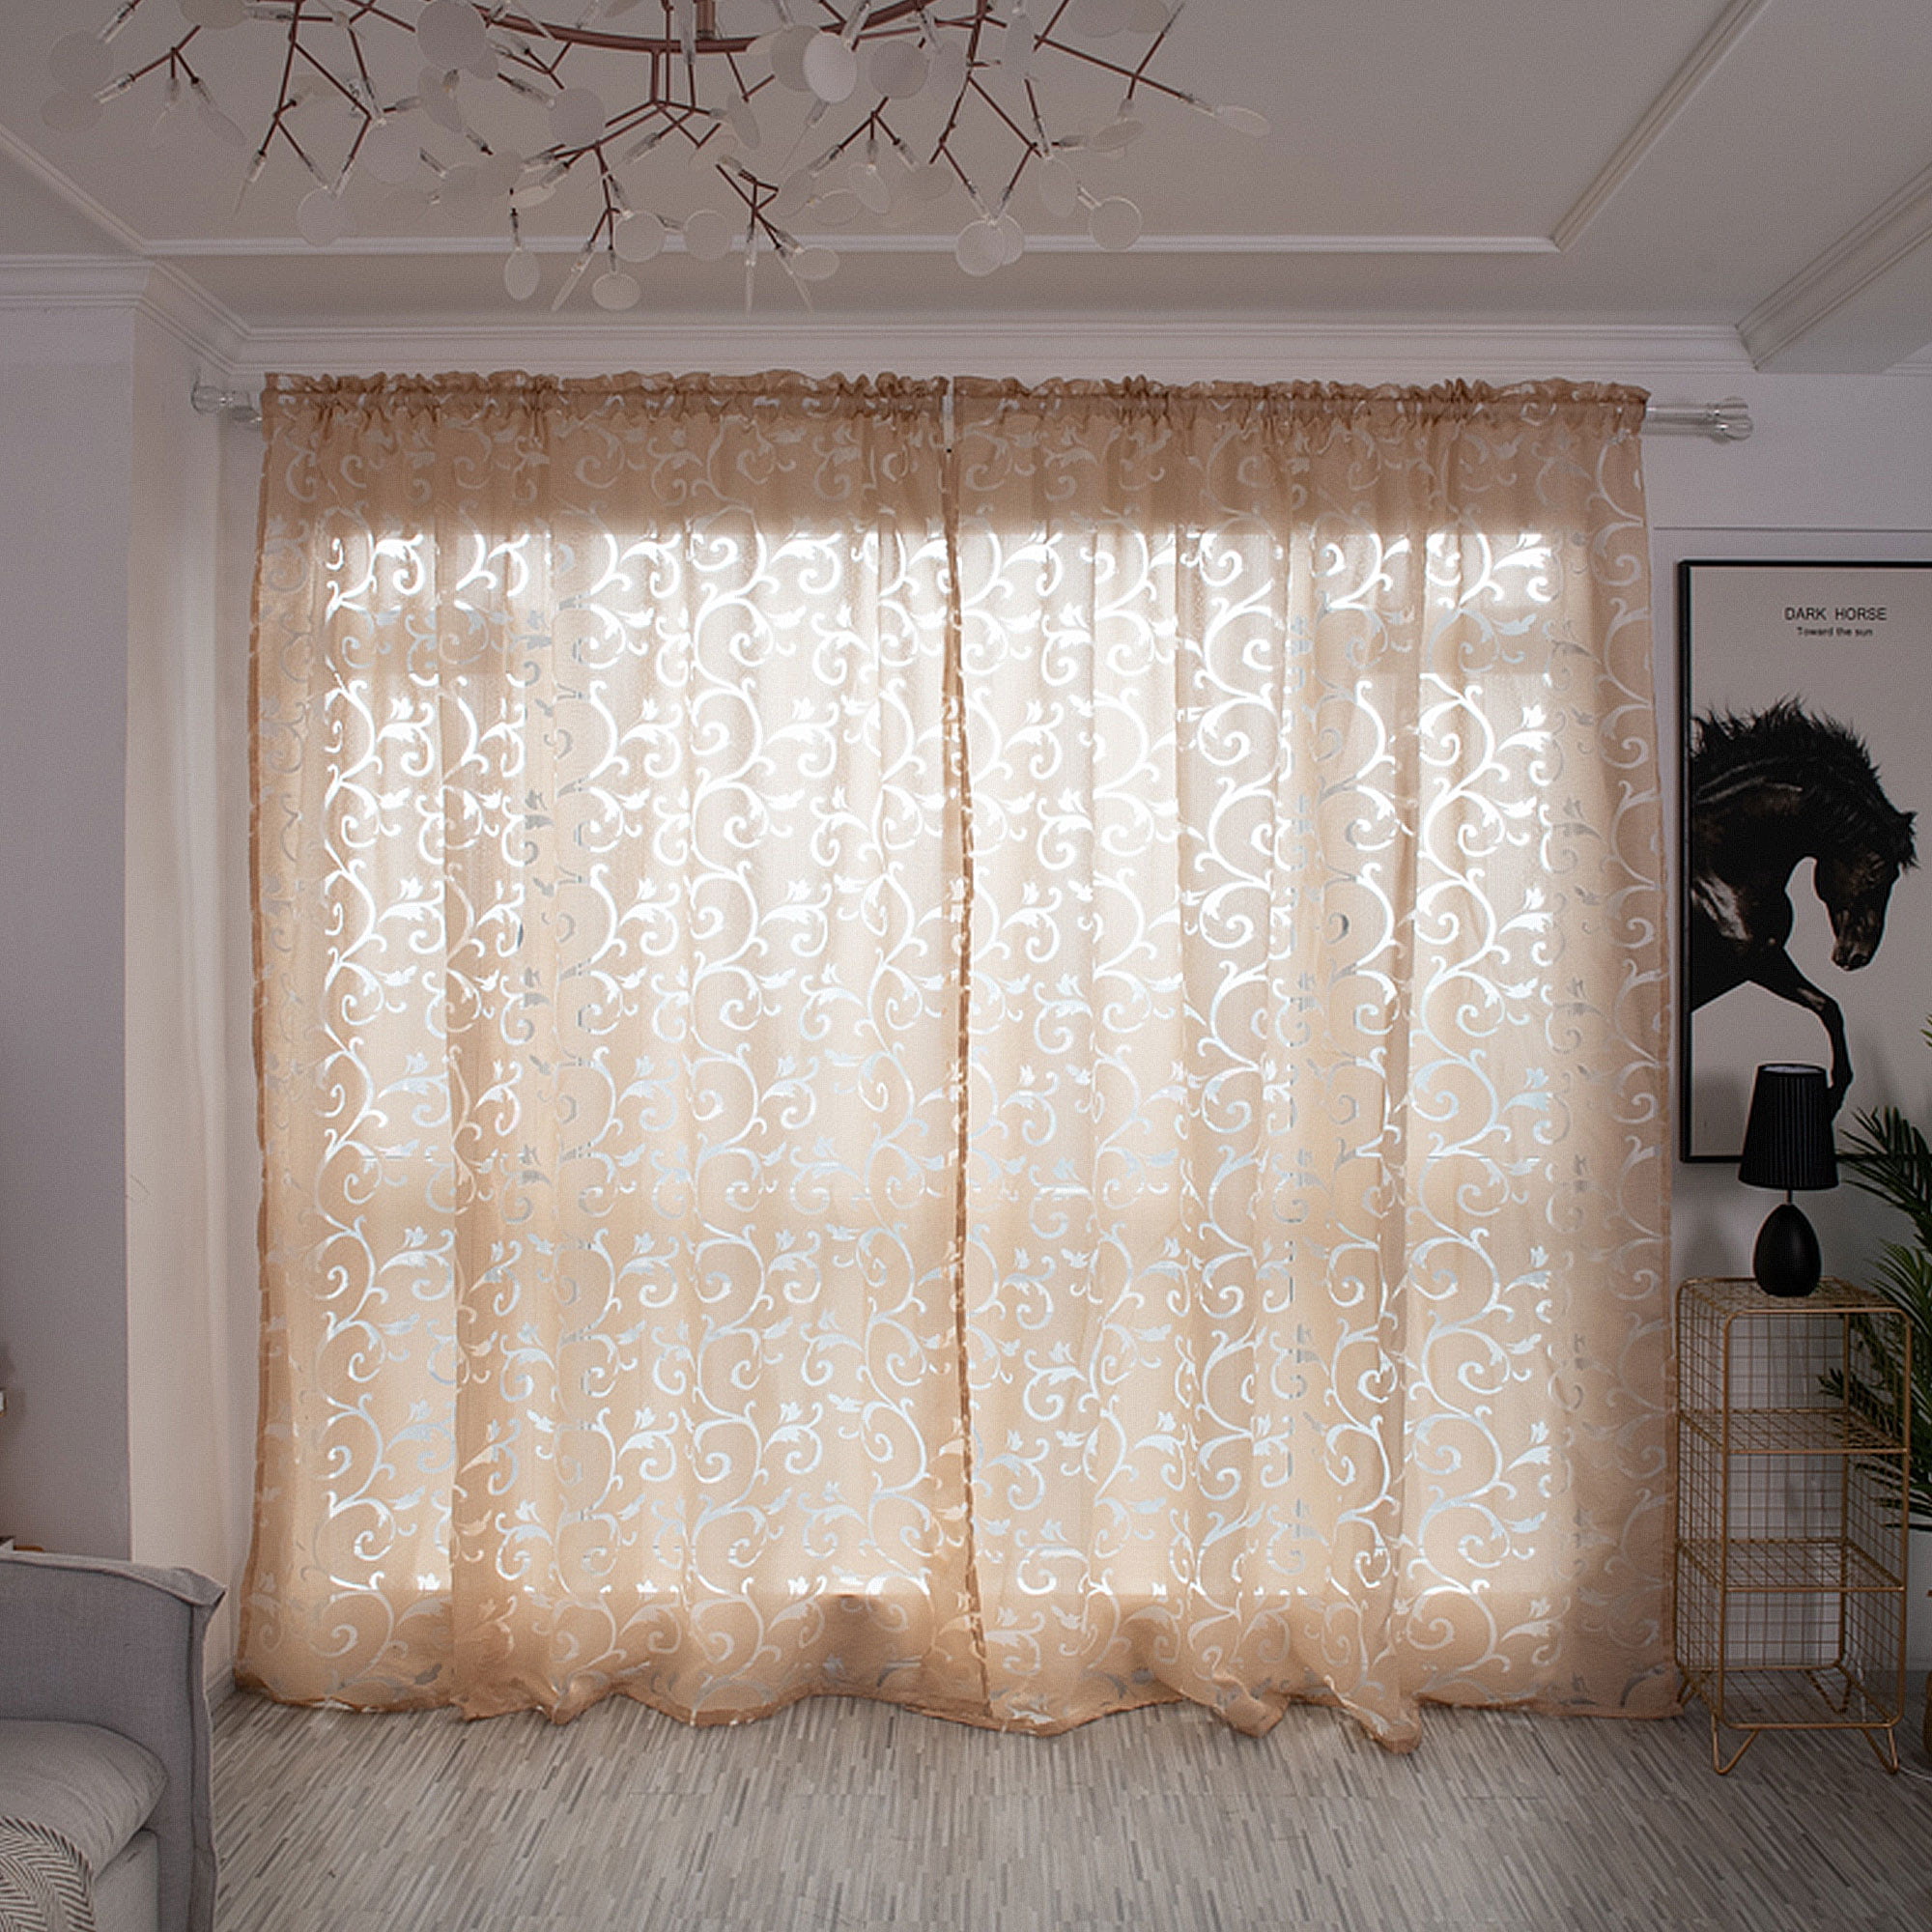 1P Tulle Curtain Window Sheer Living Room Voile Drape Panel Scarf Blackout Blind 